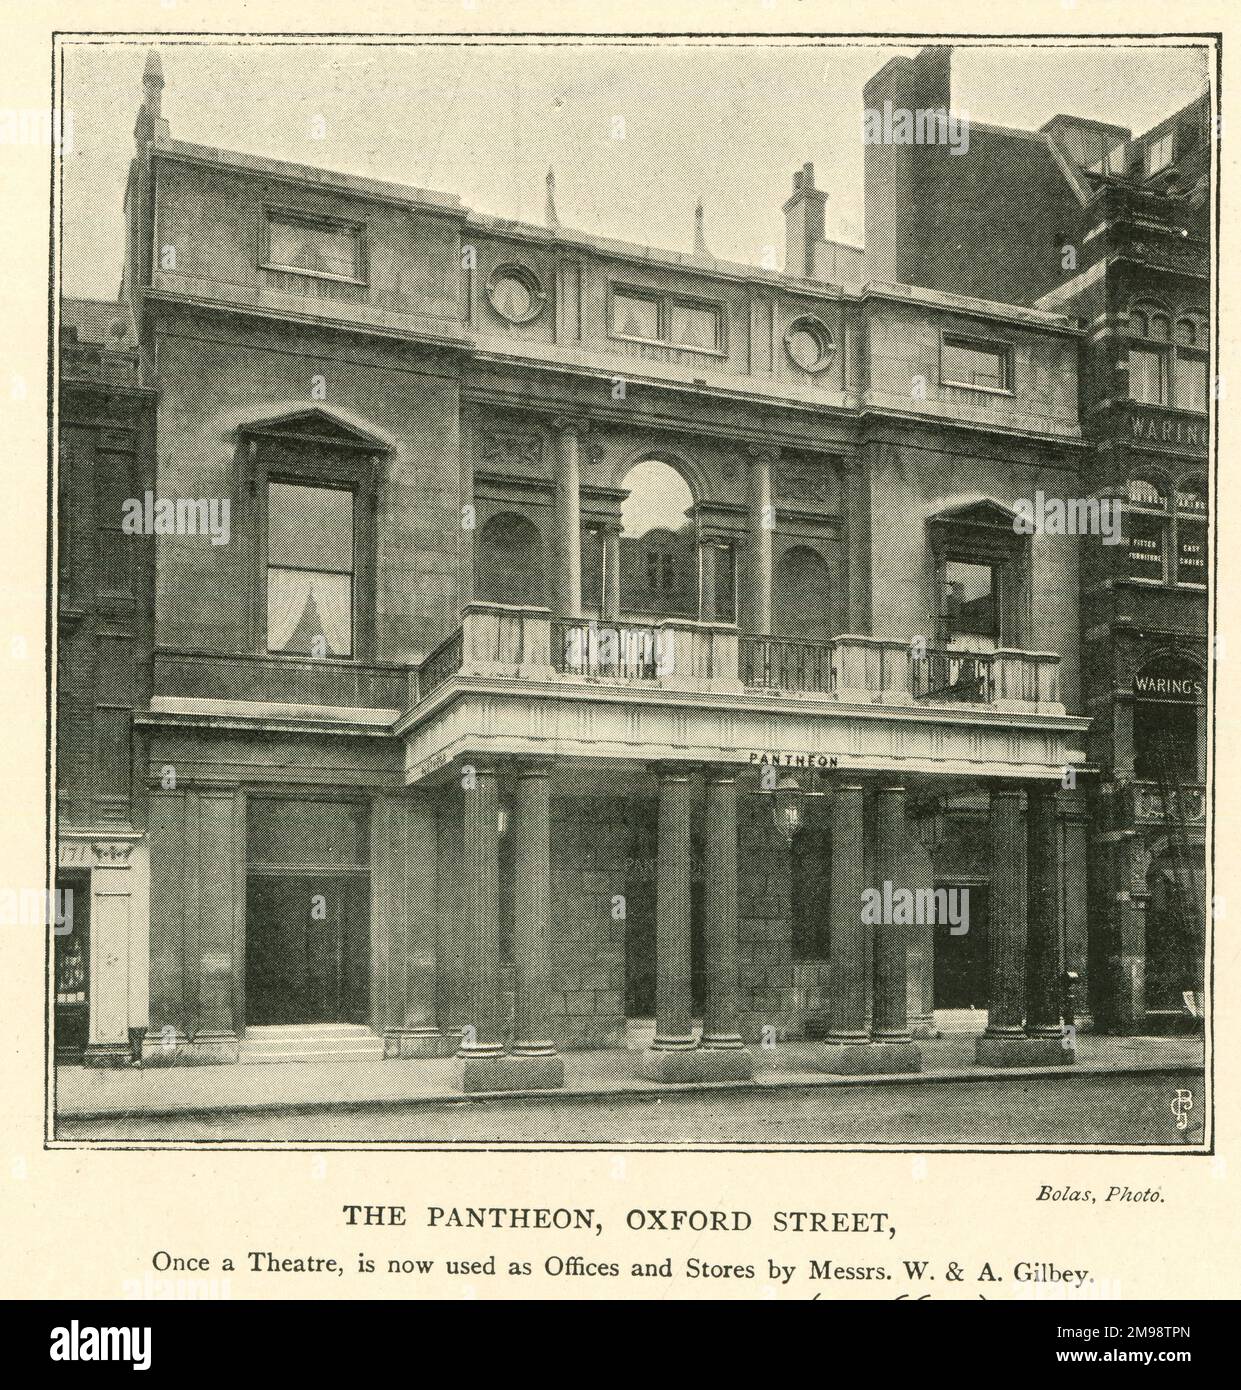 The Pantheon Theatre, Oxford Street, London, by this time used as offices and stores by Messrs W & A Gilbey, wine and spirit merchants. Stock Photo